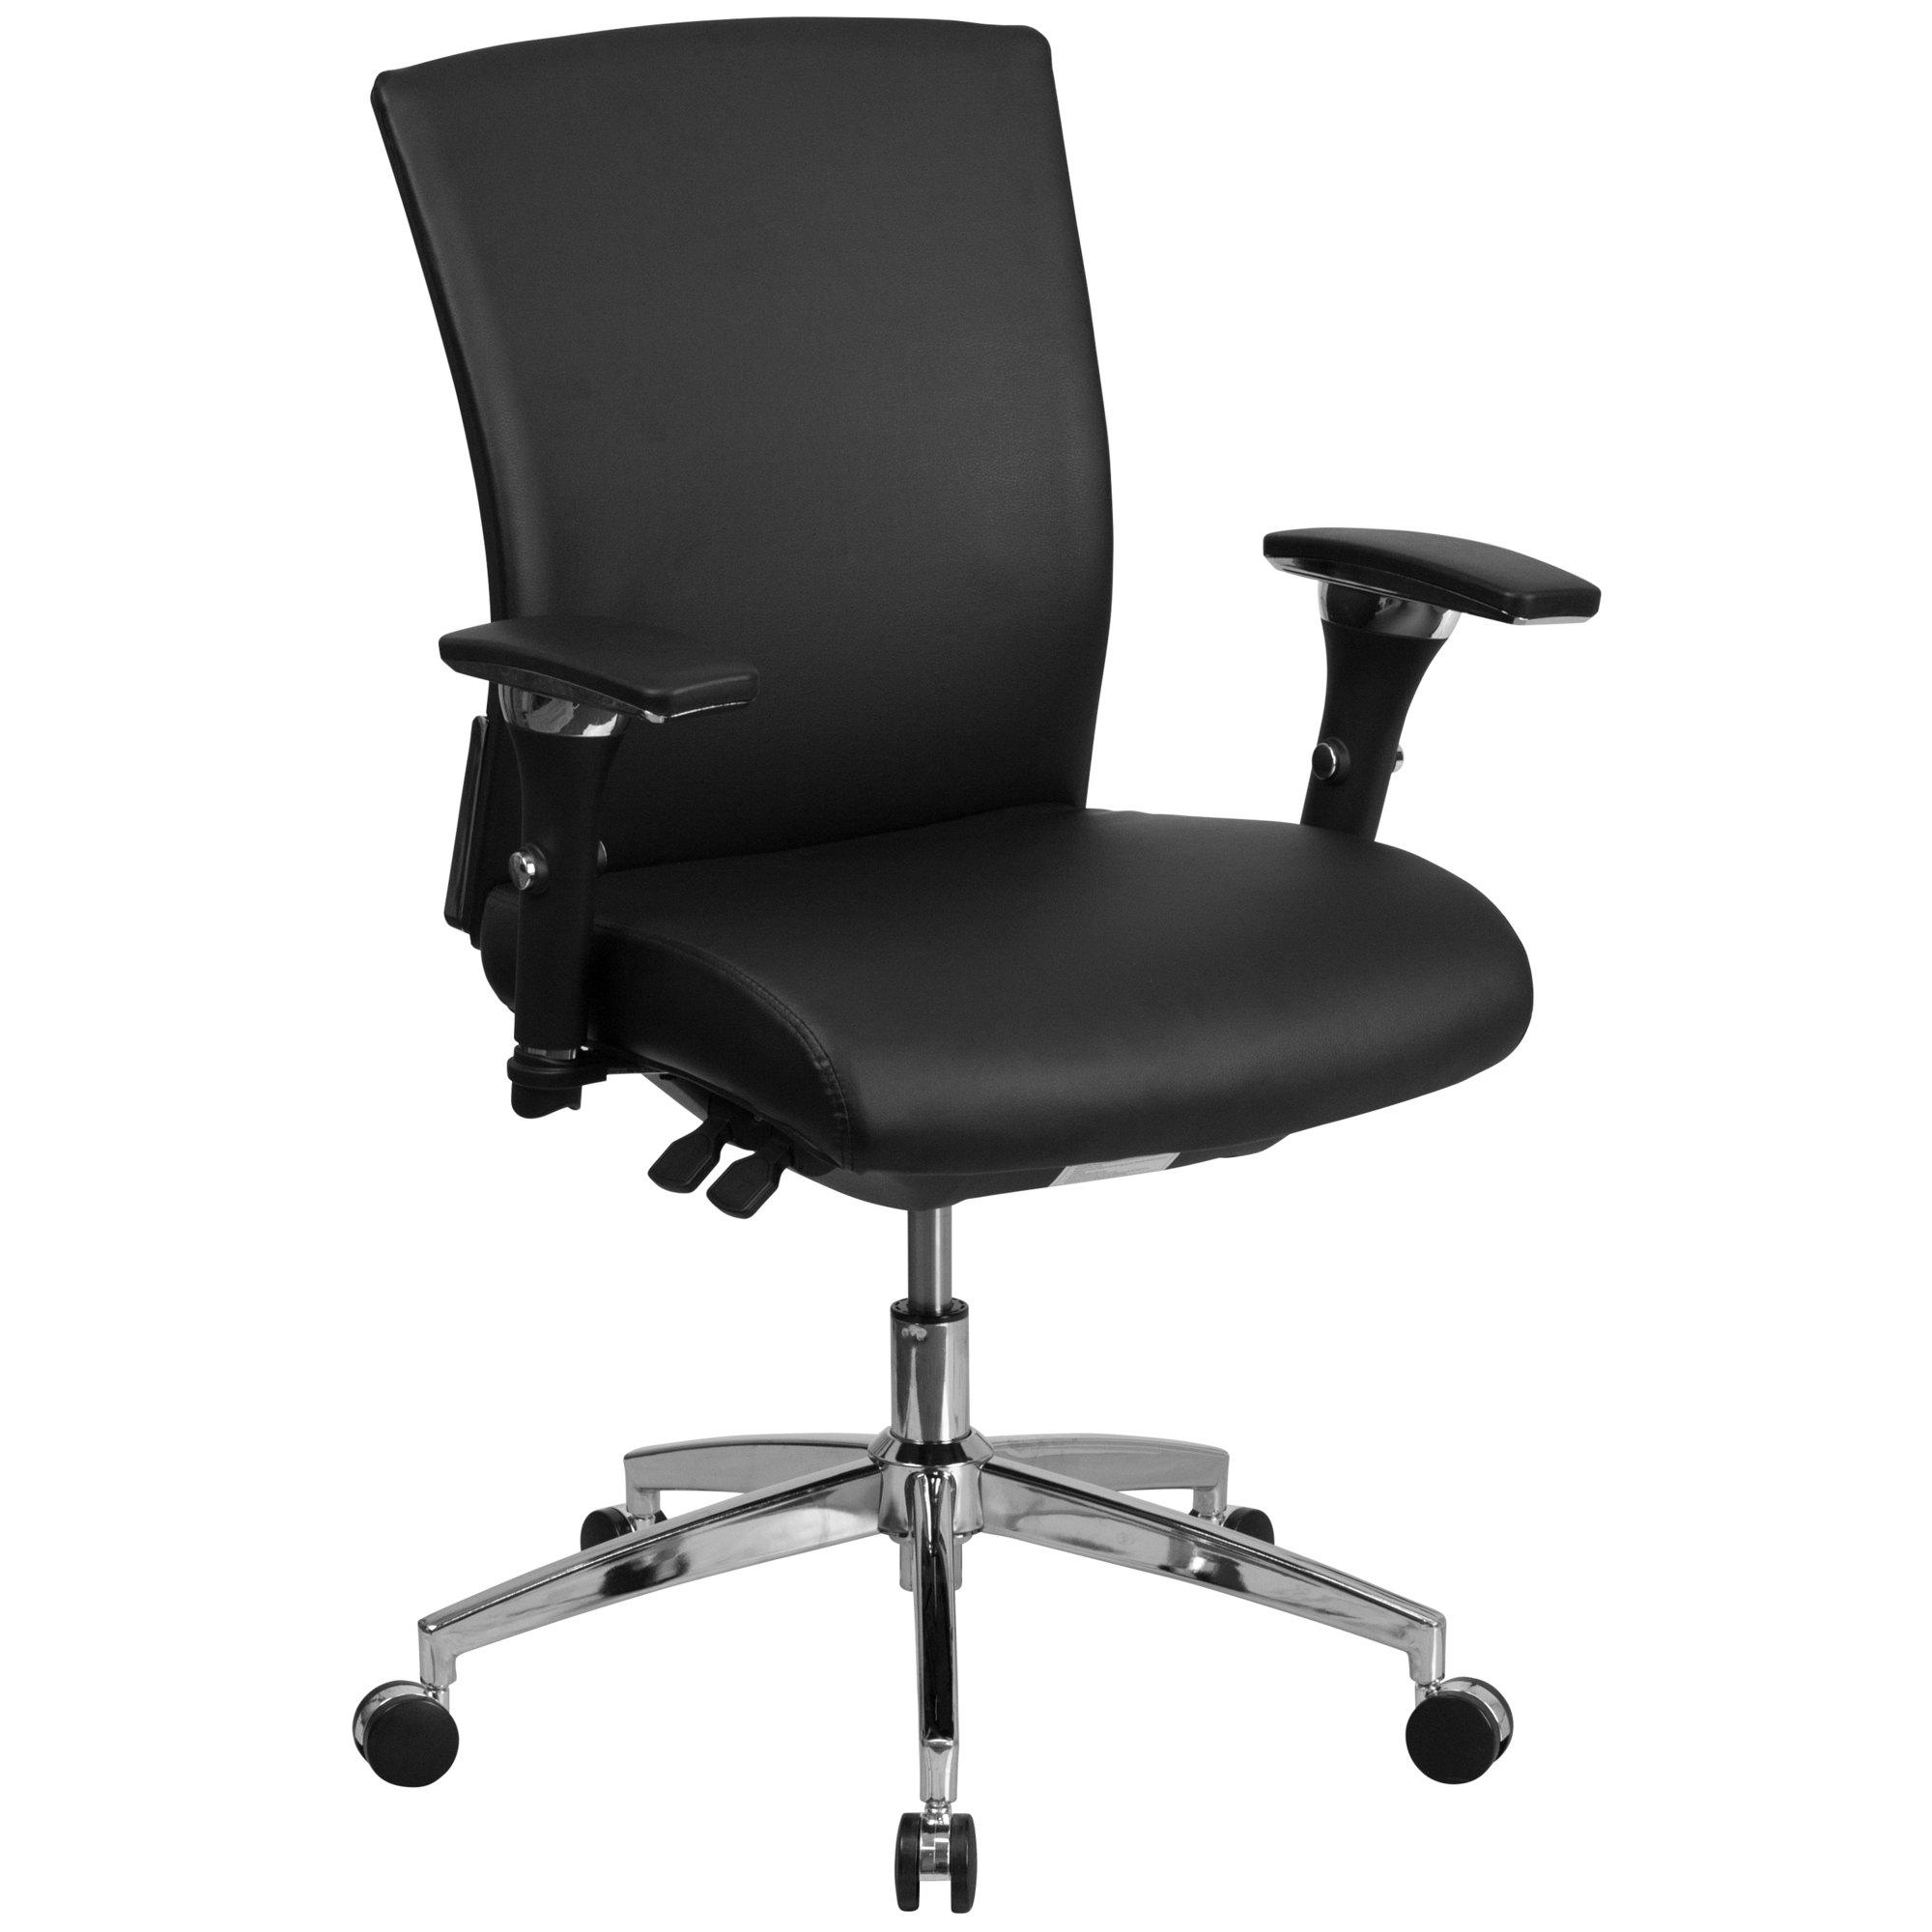 Flash Furniture, 24/7 300 lb. Rated Black LeatherSoft Chair, Primary Color Black, Included (qty.) 1, Model GOWY857